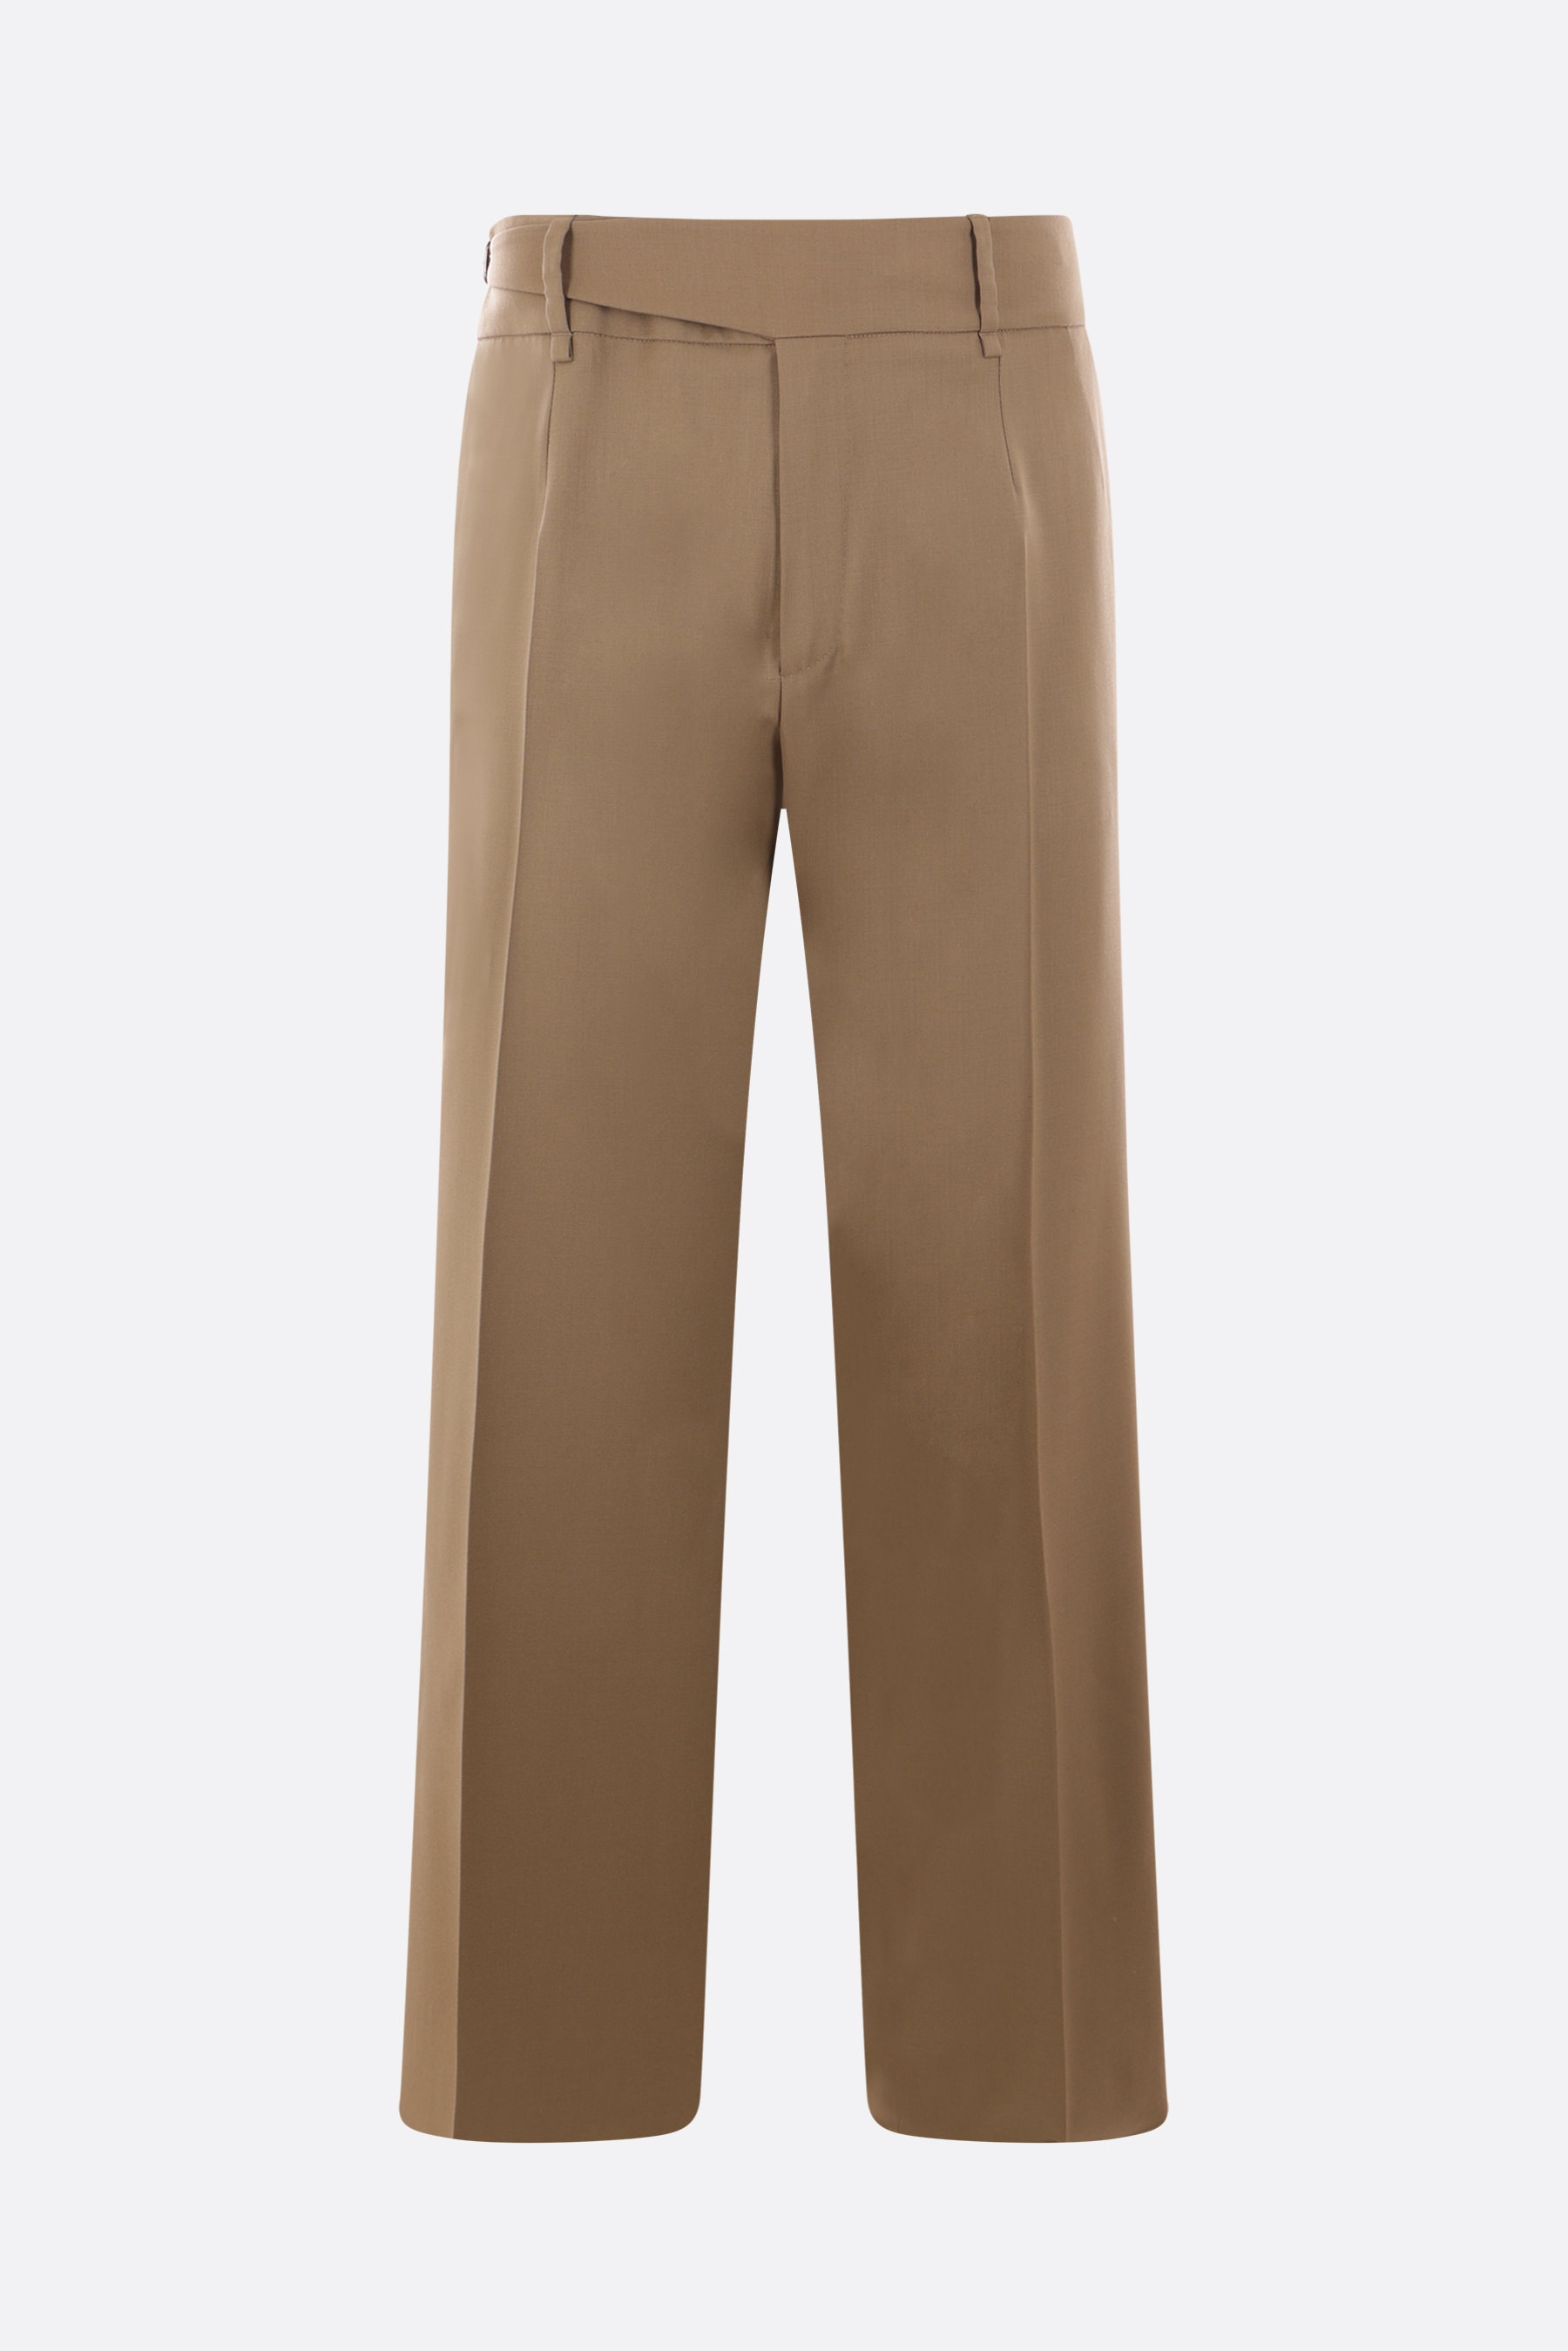 TAILORED TWO-WAY STRETCH TWILL PANTS - 1